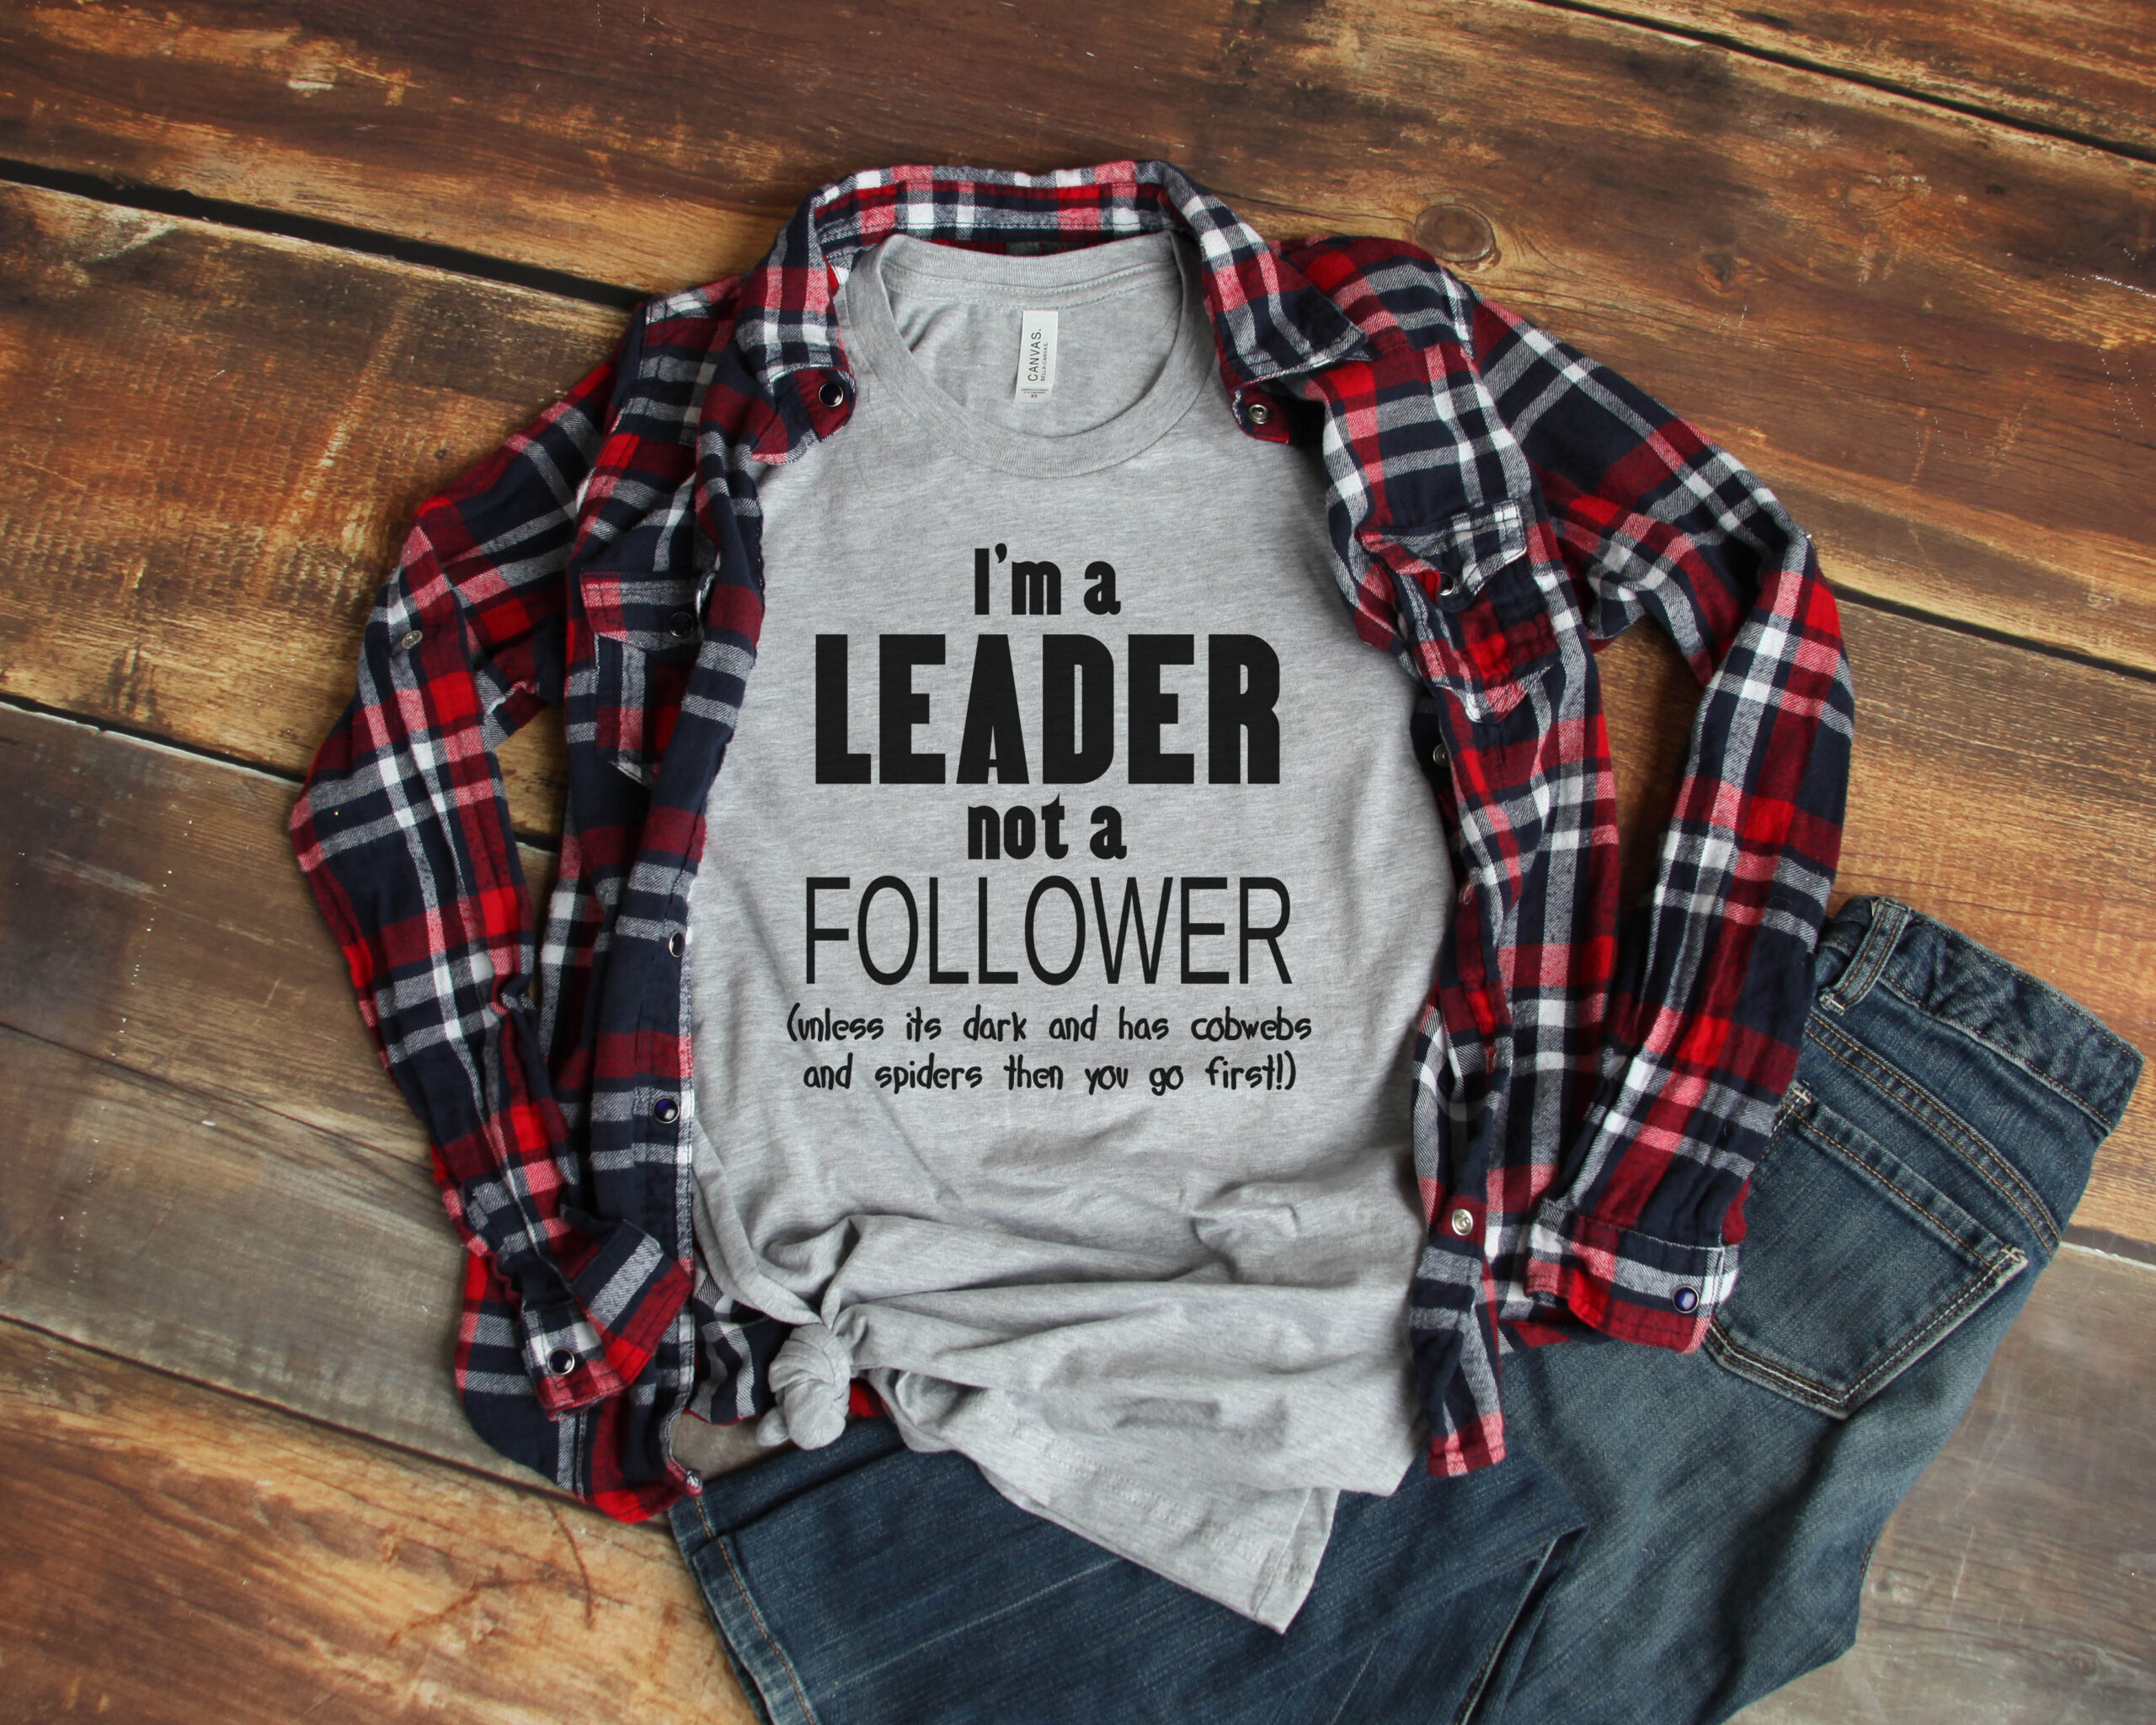 Free I'm a Leader not a Follower SVG Cutting File for the Cricut.